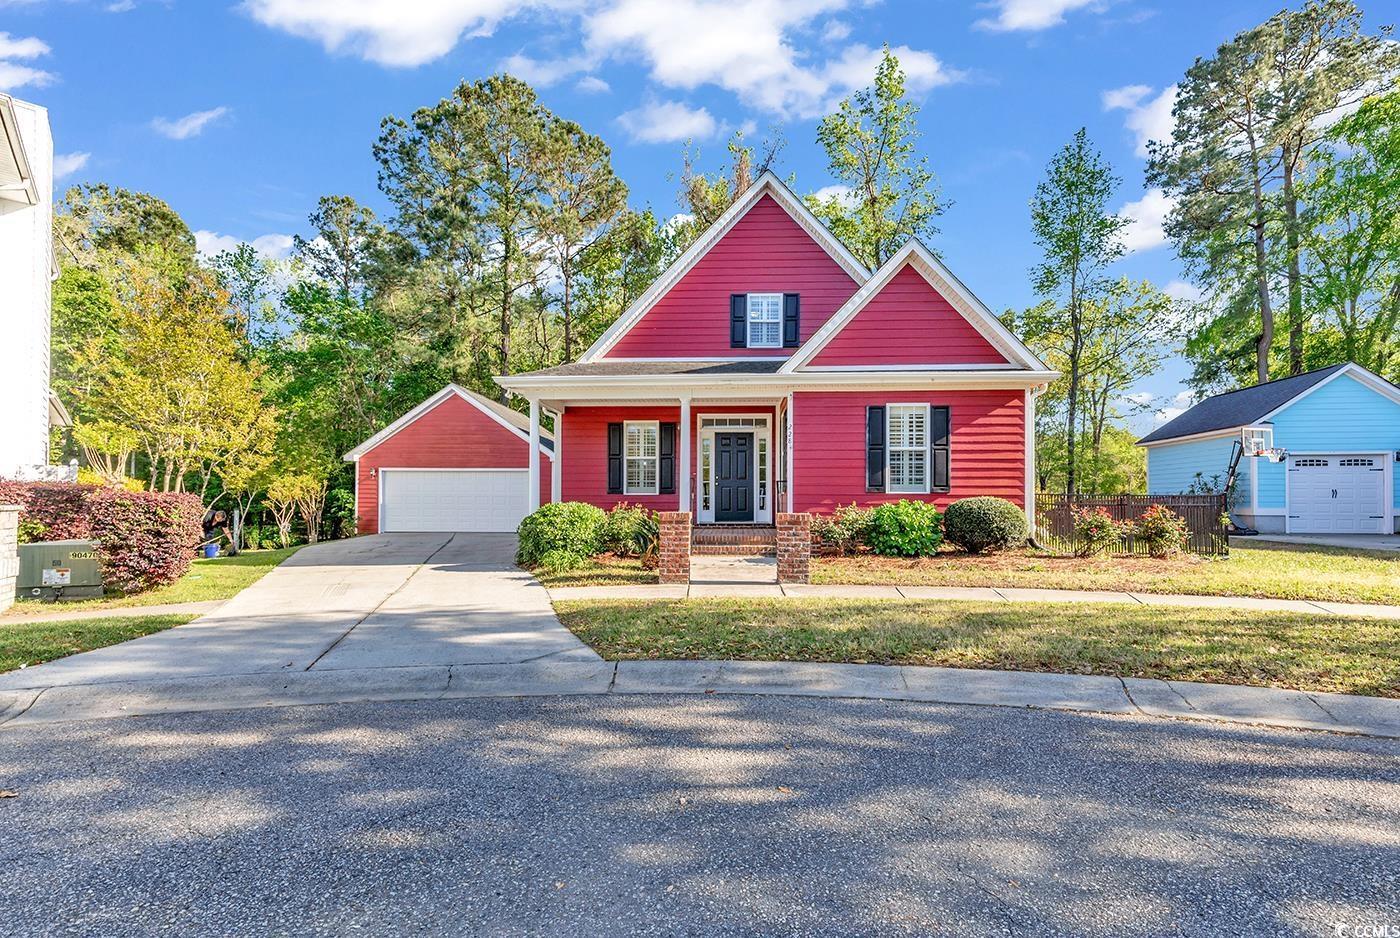 Photo one of 228 Greenwich Dr. Conway SC 29526 | MLS 2408837